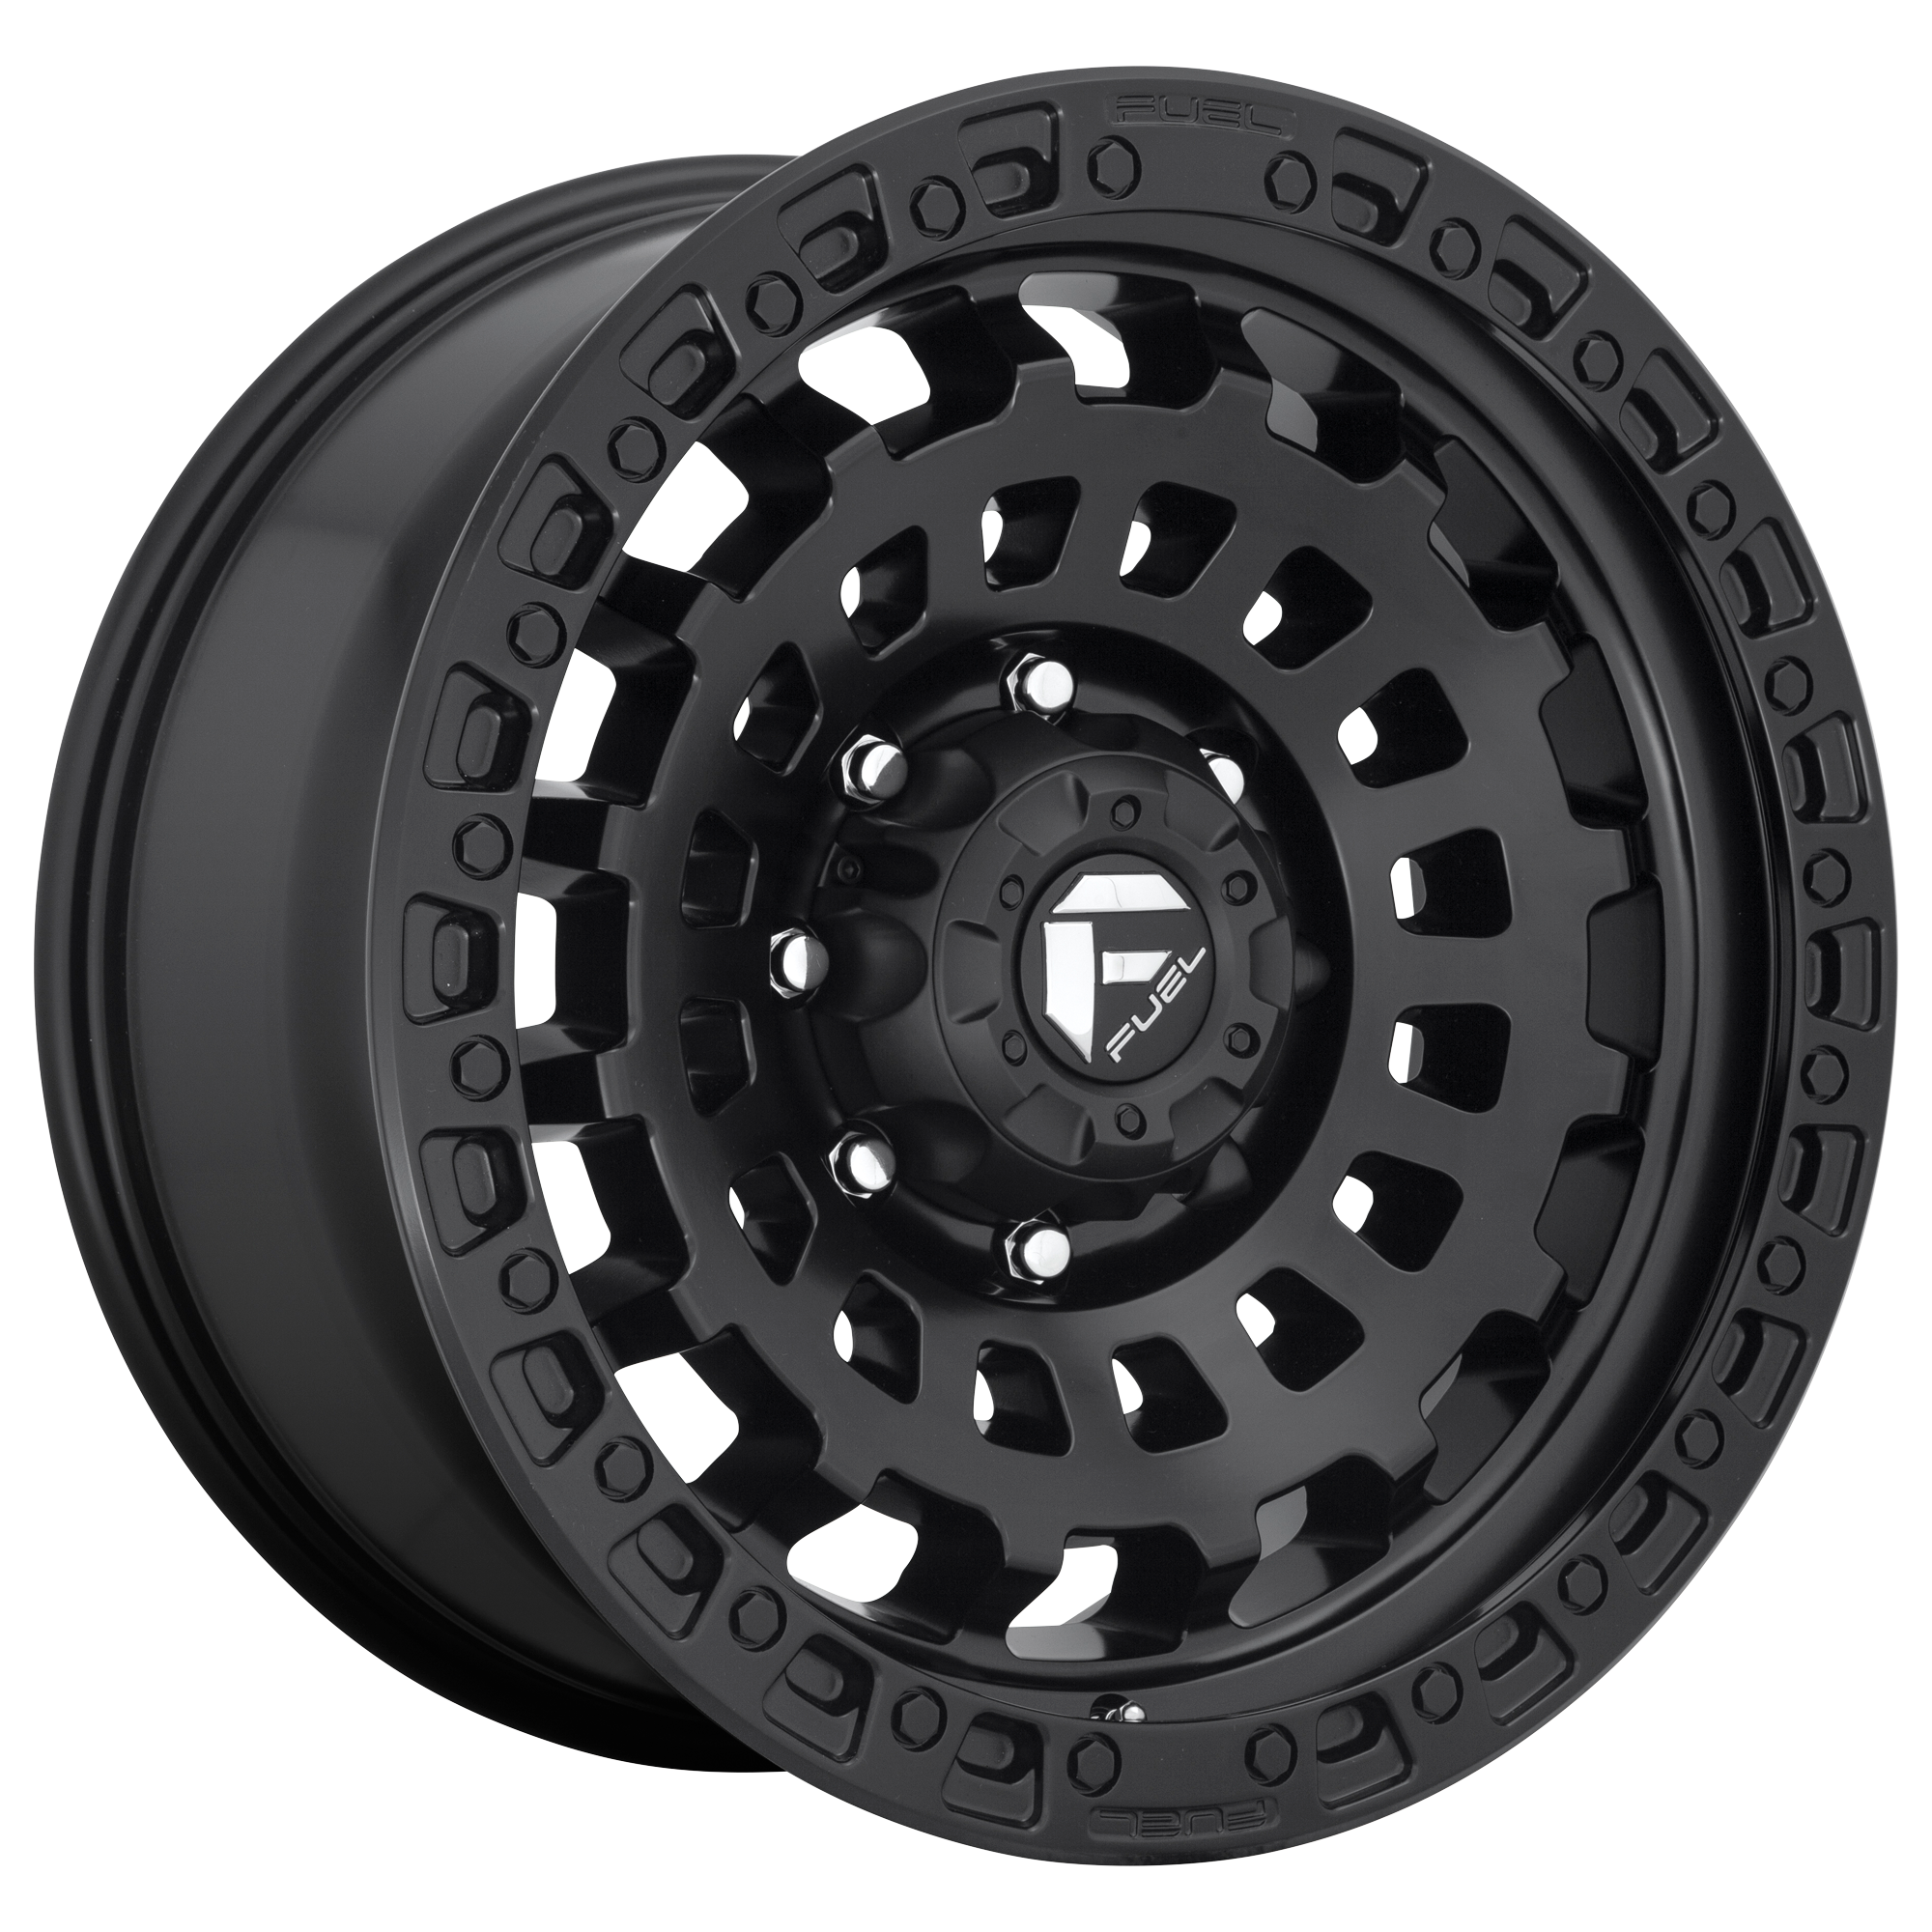 ZEPHYR 20x9 6x135.00 MATTE BLACK (1 mm) - Tires and Engine Performance